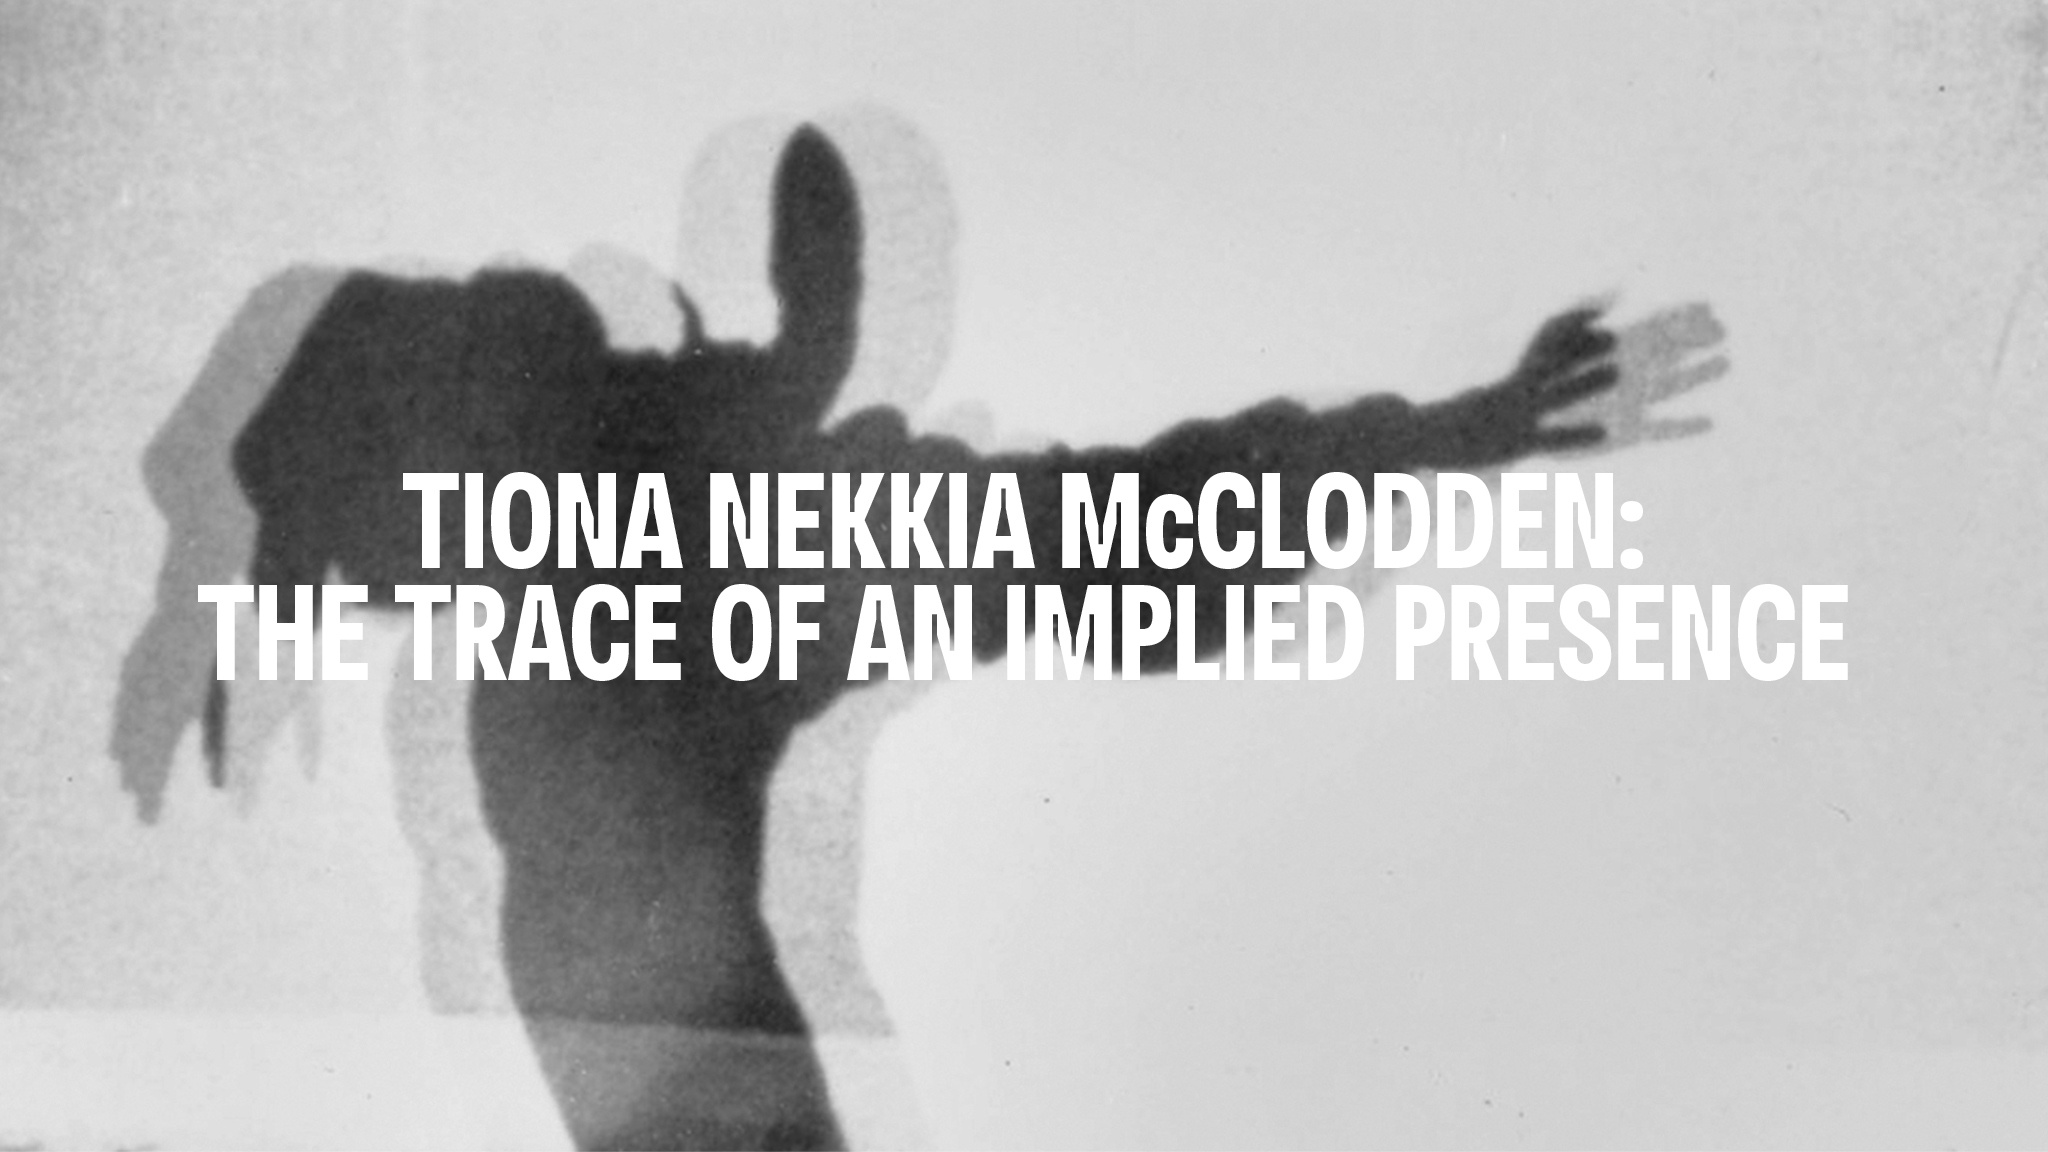 The blurry, black-and-white shadow of a human figure is seen cast on a wall. The shadow appears as if double exposed in a photograph. Over the image in white text reads Tiona Nekkia McClodden: The Trace of an Implied Presence.